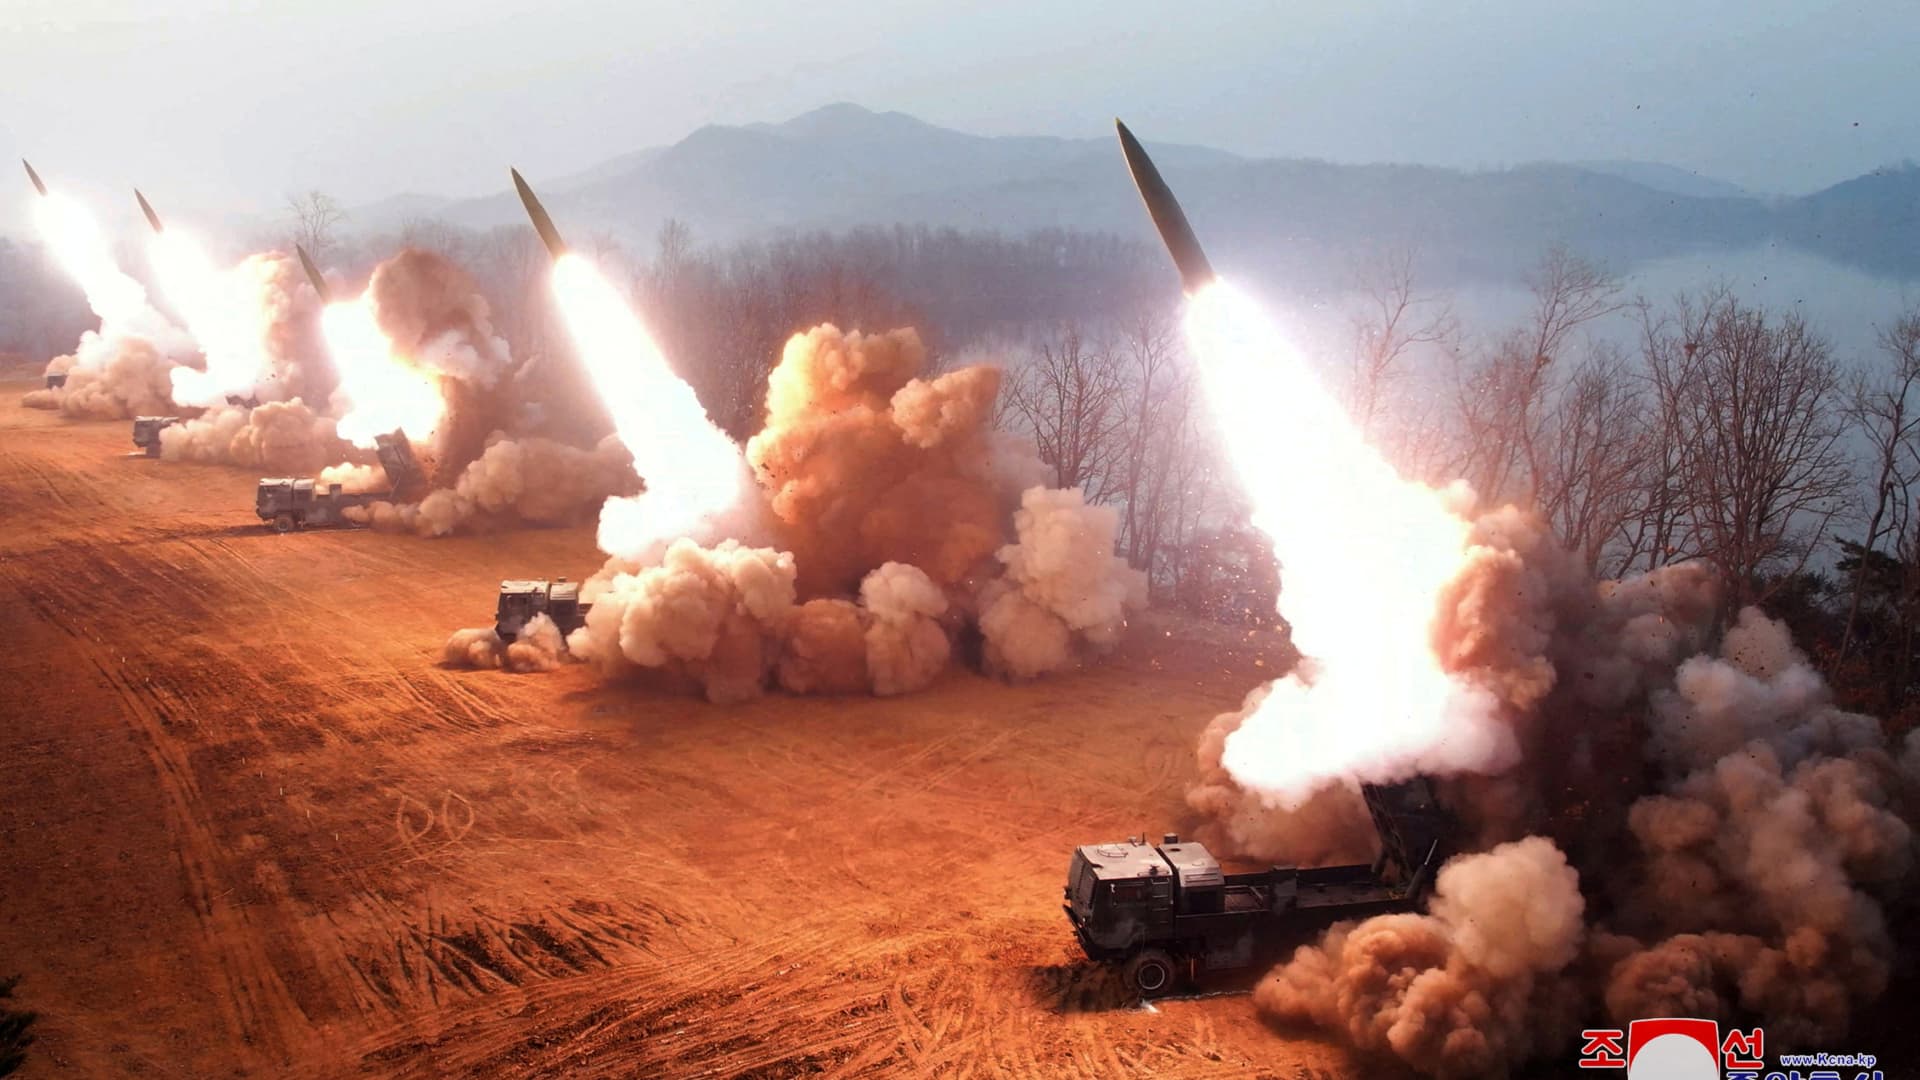 A fire assault drill by North Korean rocket artillery units at an undisclosed location in North Korea in March 2023 in this photo released by North Korea's Korean Central News Agency (KCNA). Around 6,000 of these units are located in range of South Korean population centers.